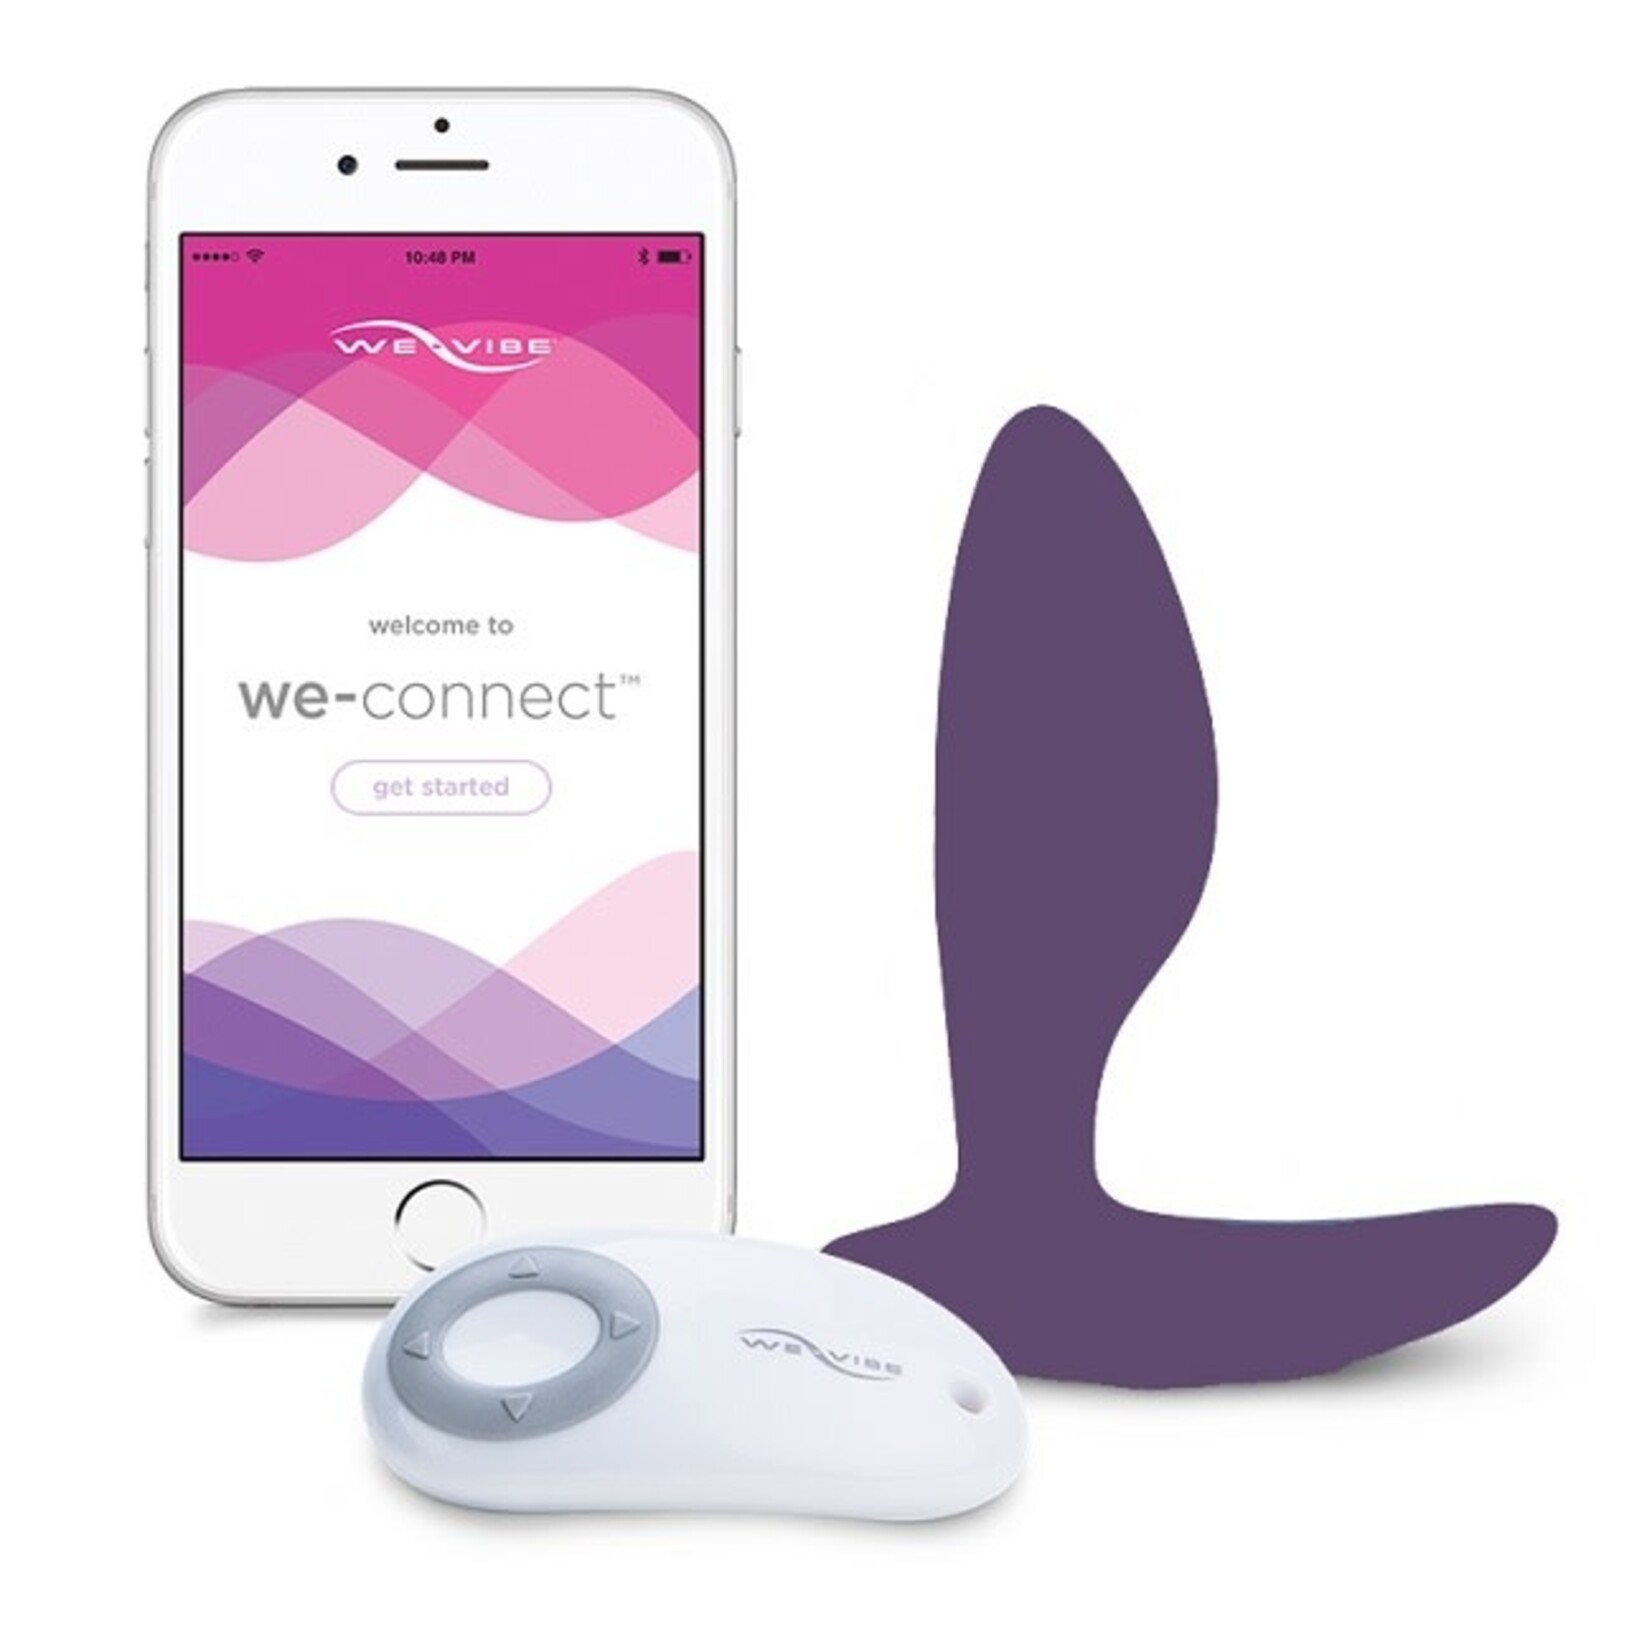 We-Vibe We-Vibe Ditto